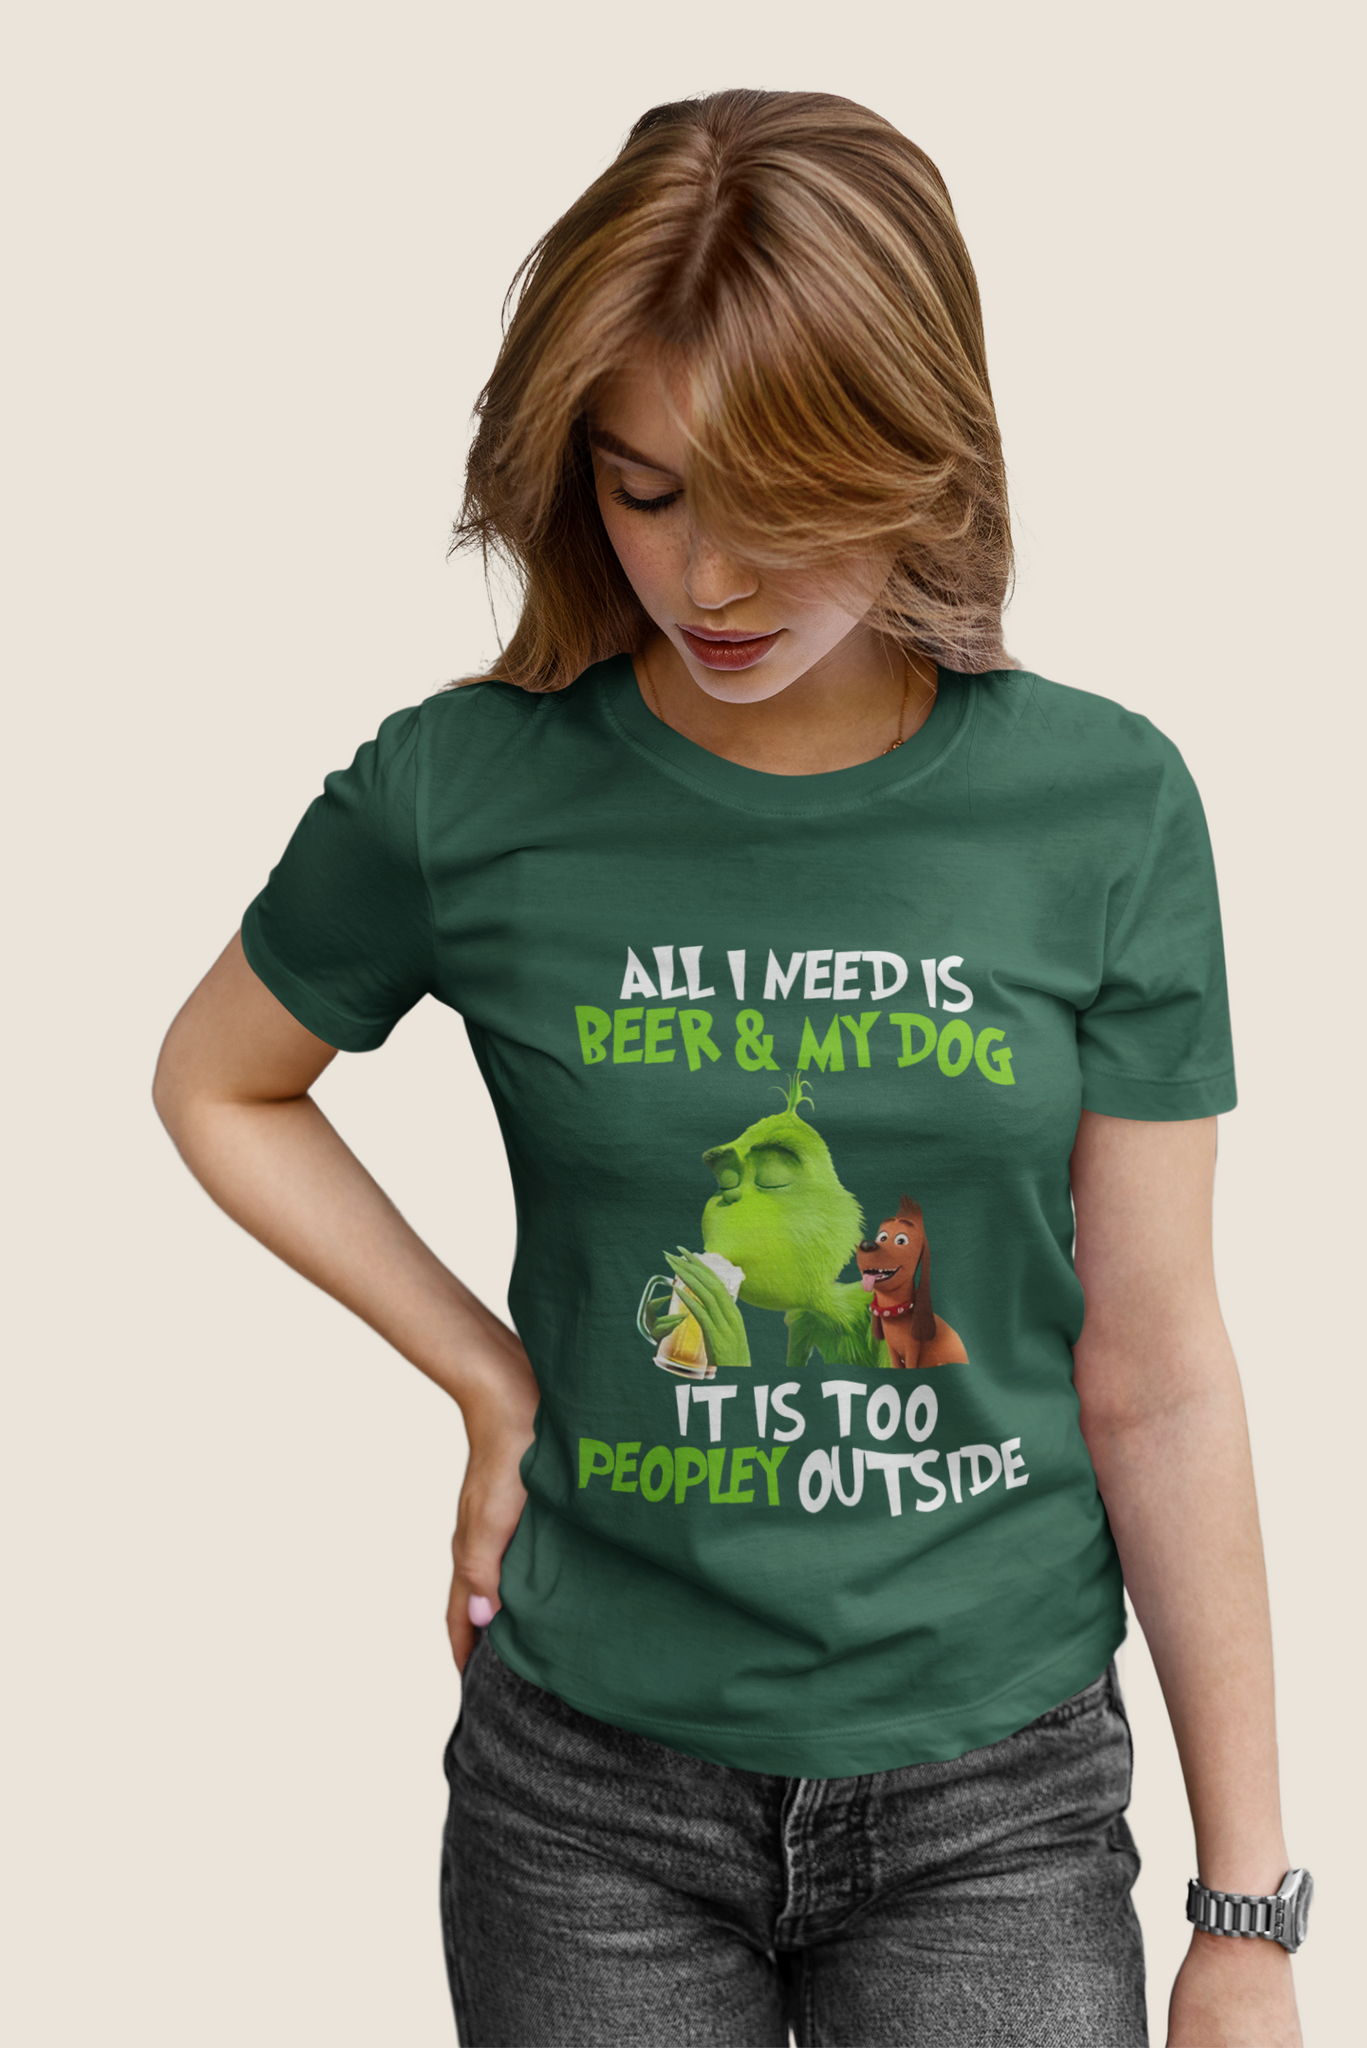 Grinch T Shirt, Grinch And Max T Shirt, All I Need Is Beer And My Dog Tshirt, It Is Too Peopley Outside Shirt, Christmas Gifts